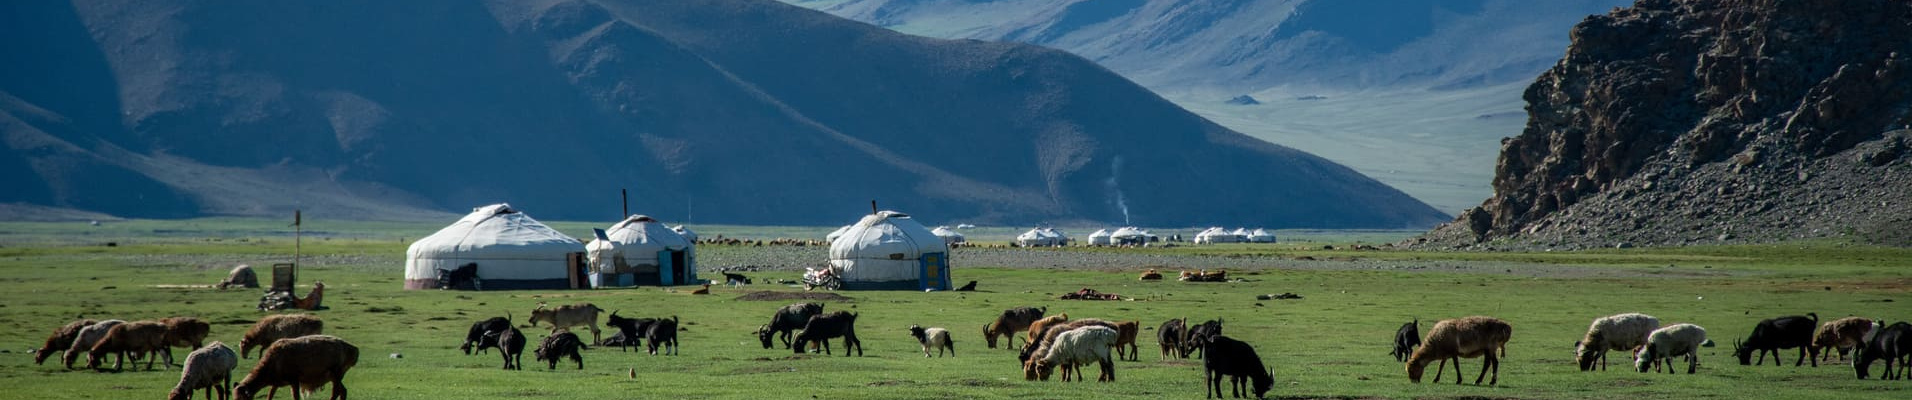 animaux-yourtes-mongolie